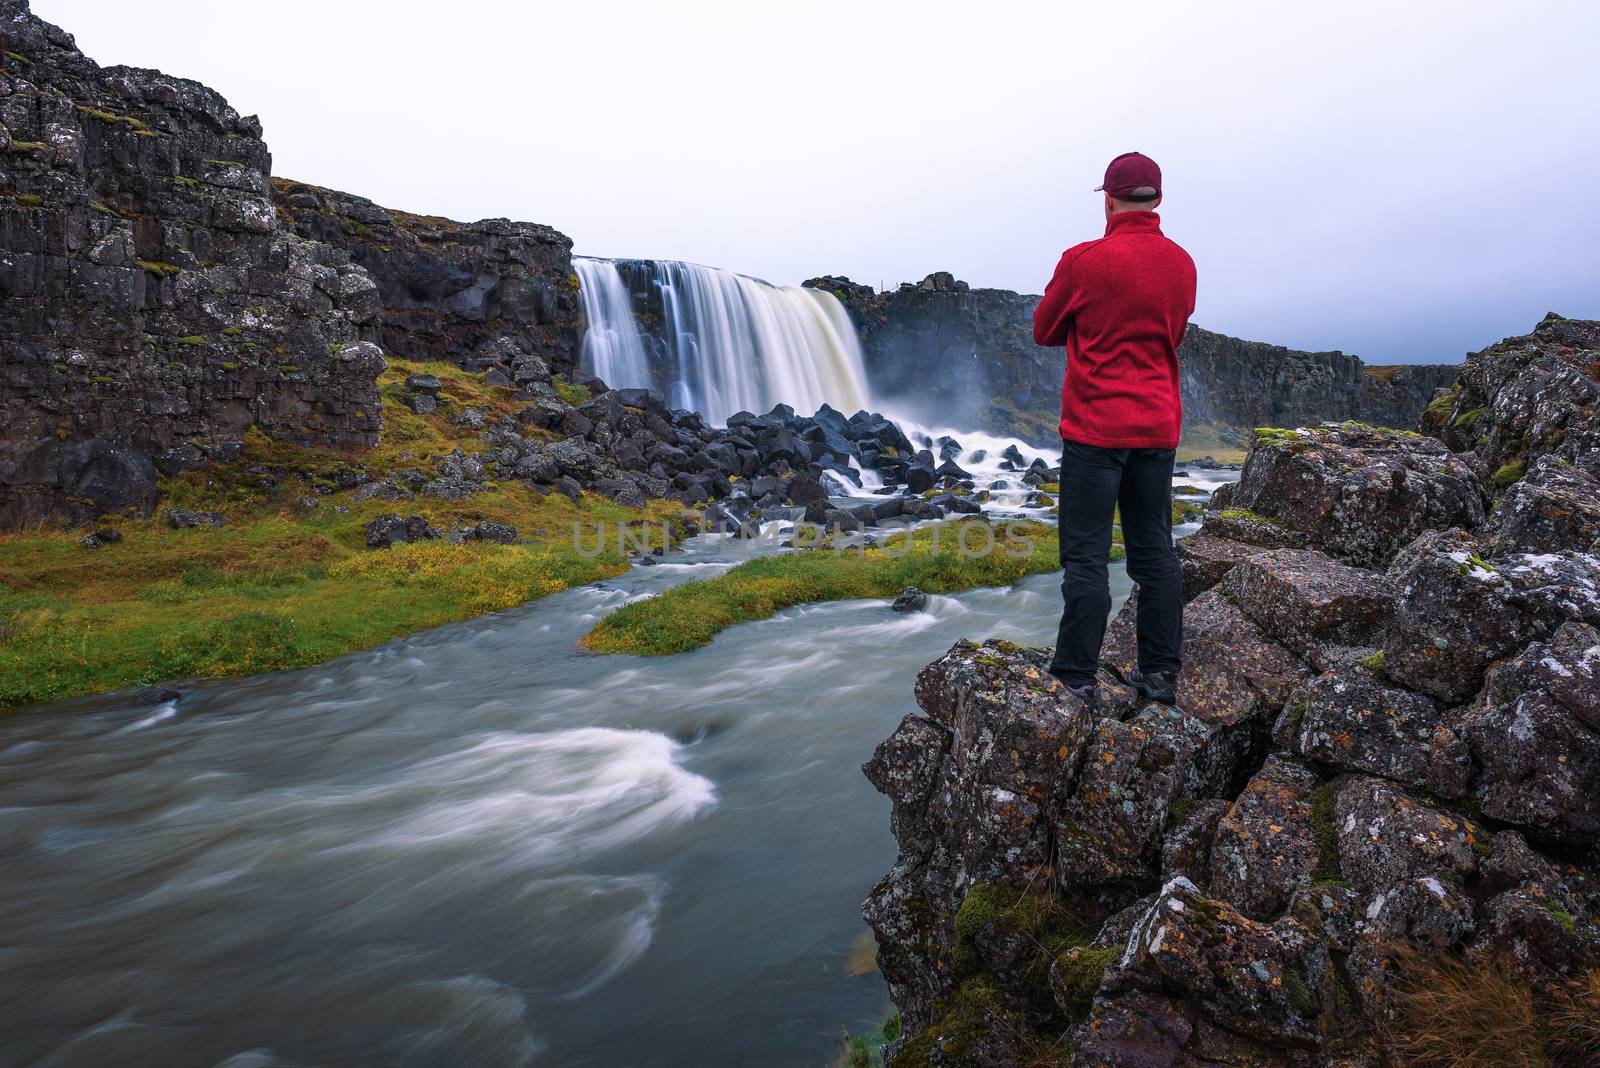 Tourist looking at the Oxarafoss waterfall in Iceland. This waterfall is located in the Thingvellir National Park on the river Oxara.